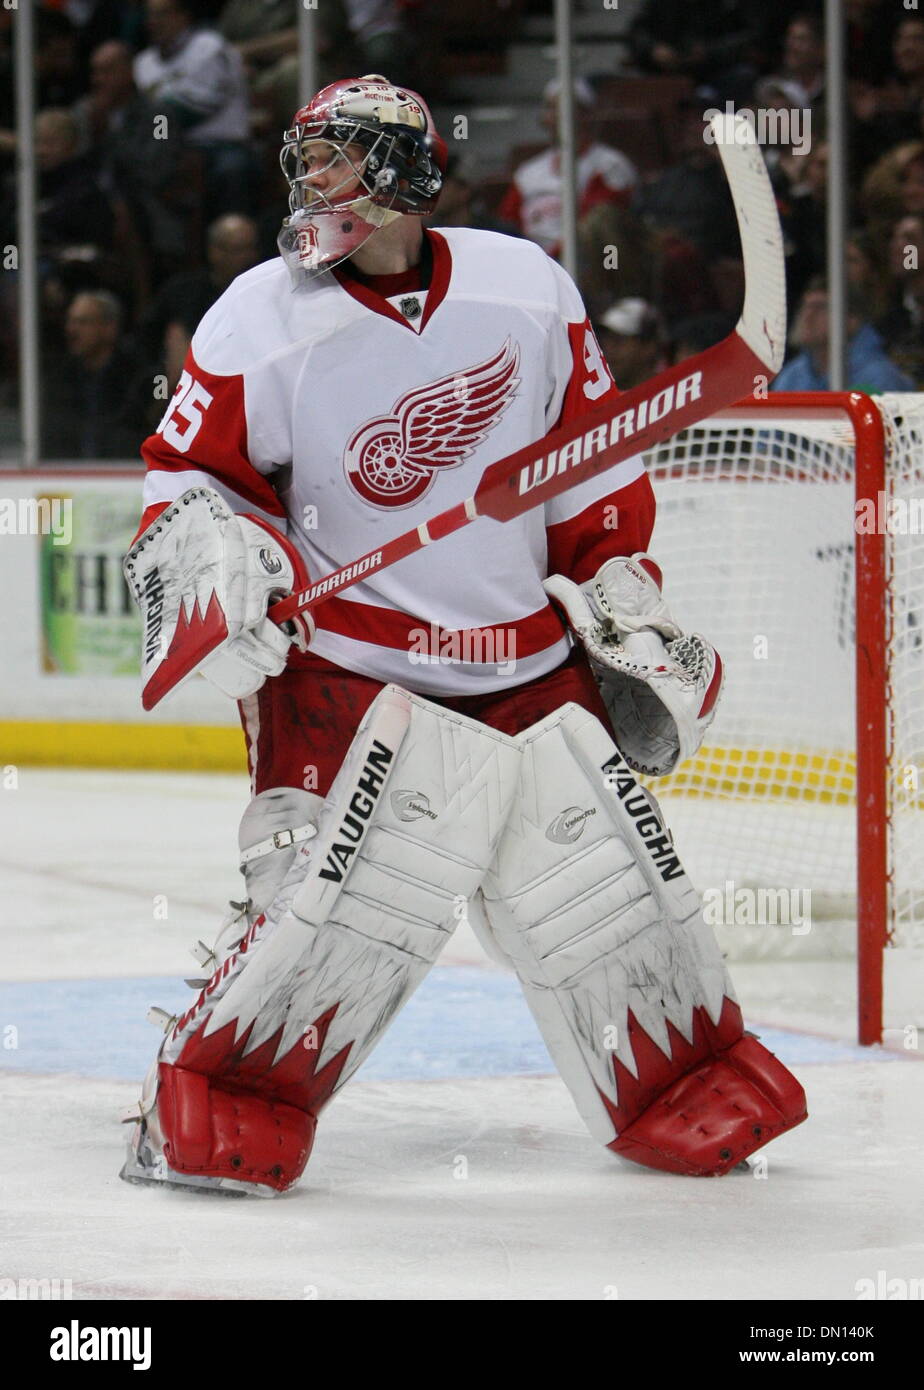 Jan 05, 2010 - Anaheim, California, USA - Detroit Red Wings goalie JIMMY HOWARD is pictured during an NHL hockey game against the Anaheim Ducks at the Honda Center. (Credit Image: © Mark Samala/ZUMA Press) Stock Photo